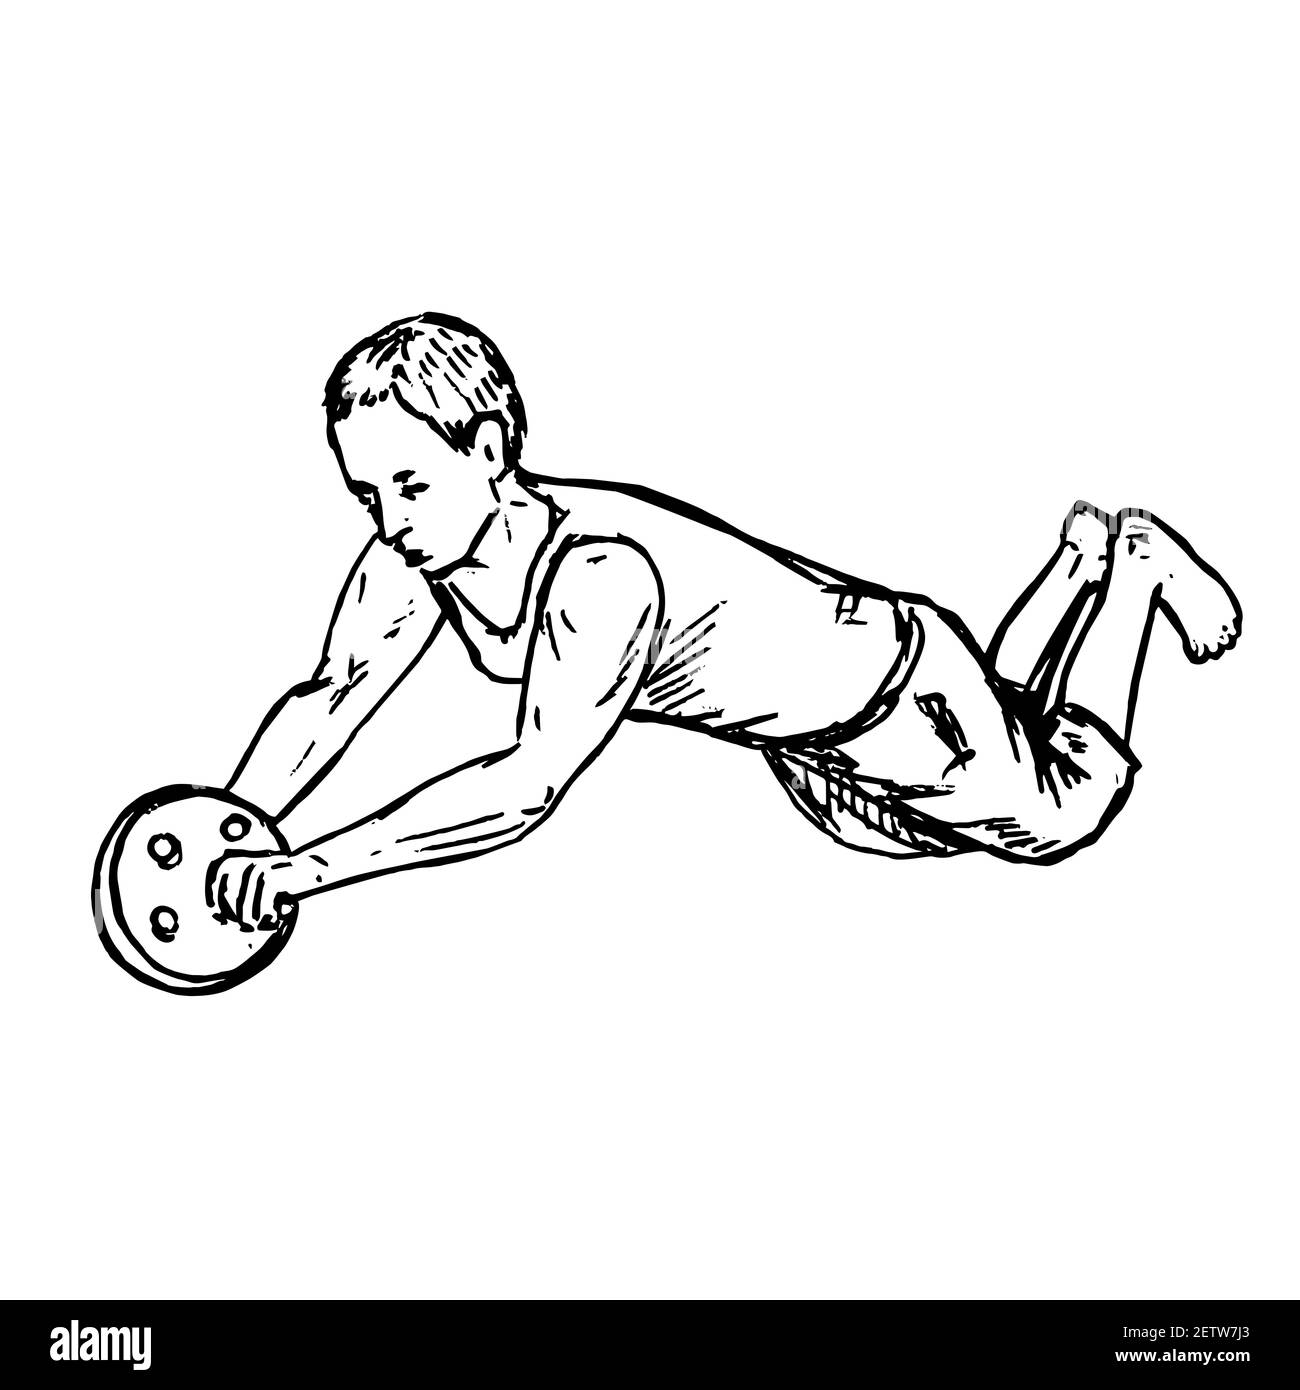 Man doing dumbbell push-ups, hand drawn doodle, drawing in gravure style, sketch illustration Stock Photo